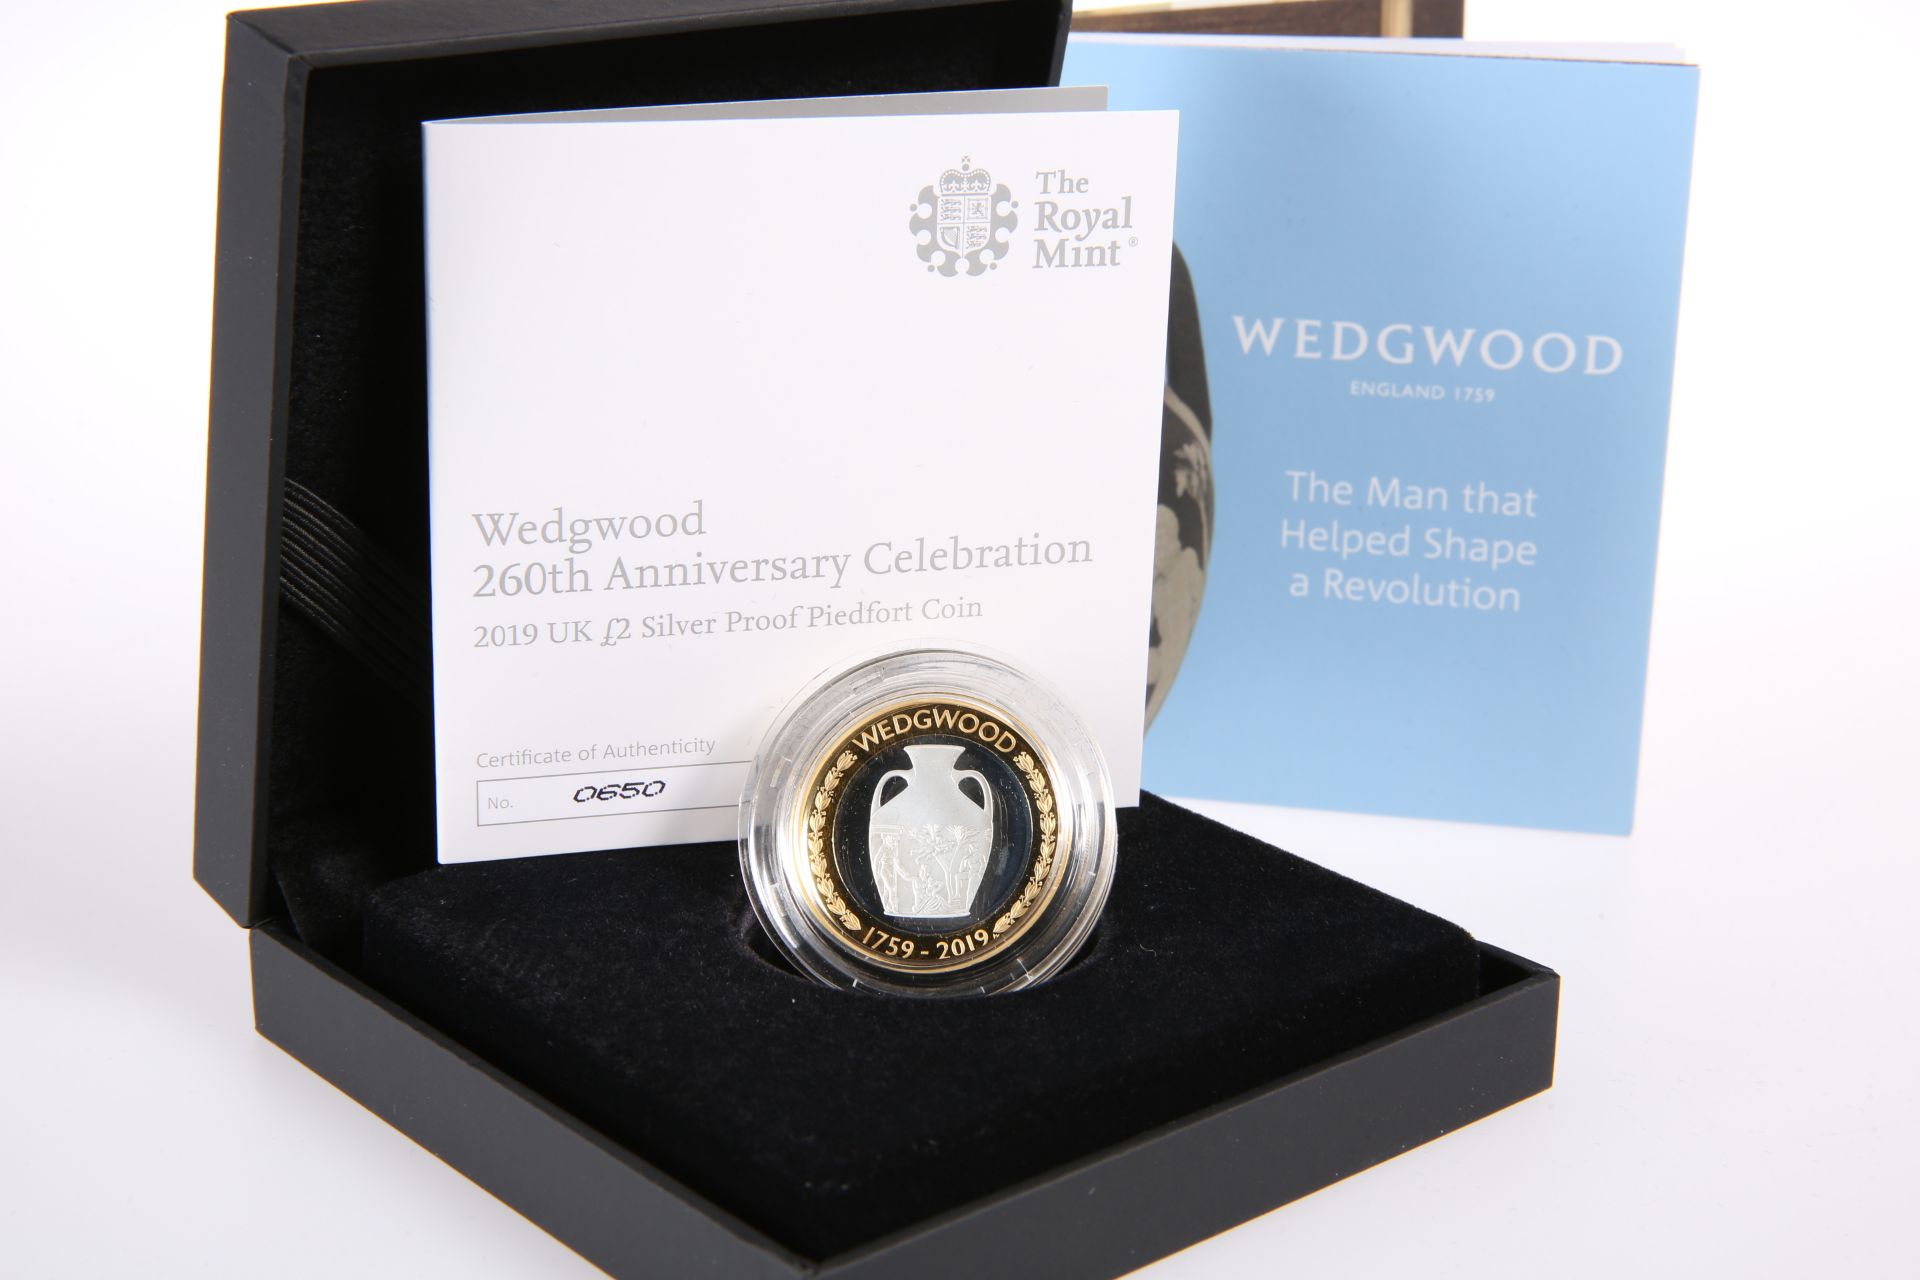 A ROYAL MINT WEDGWOOD 260TH ANNIVERSARY CELEBRATION 2019 £2 SILVER PROOF PIEDFORT COIN, boxed with